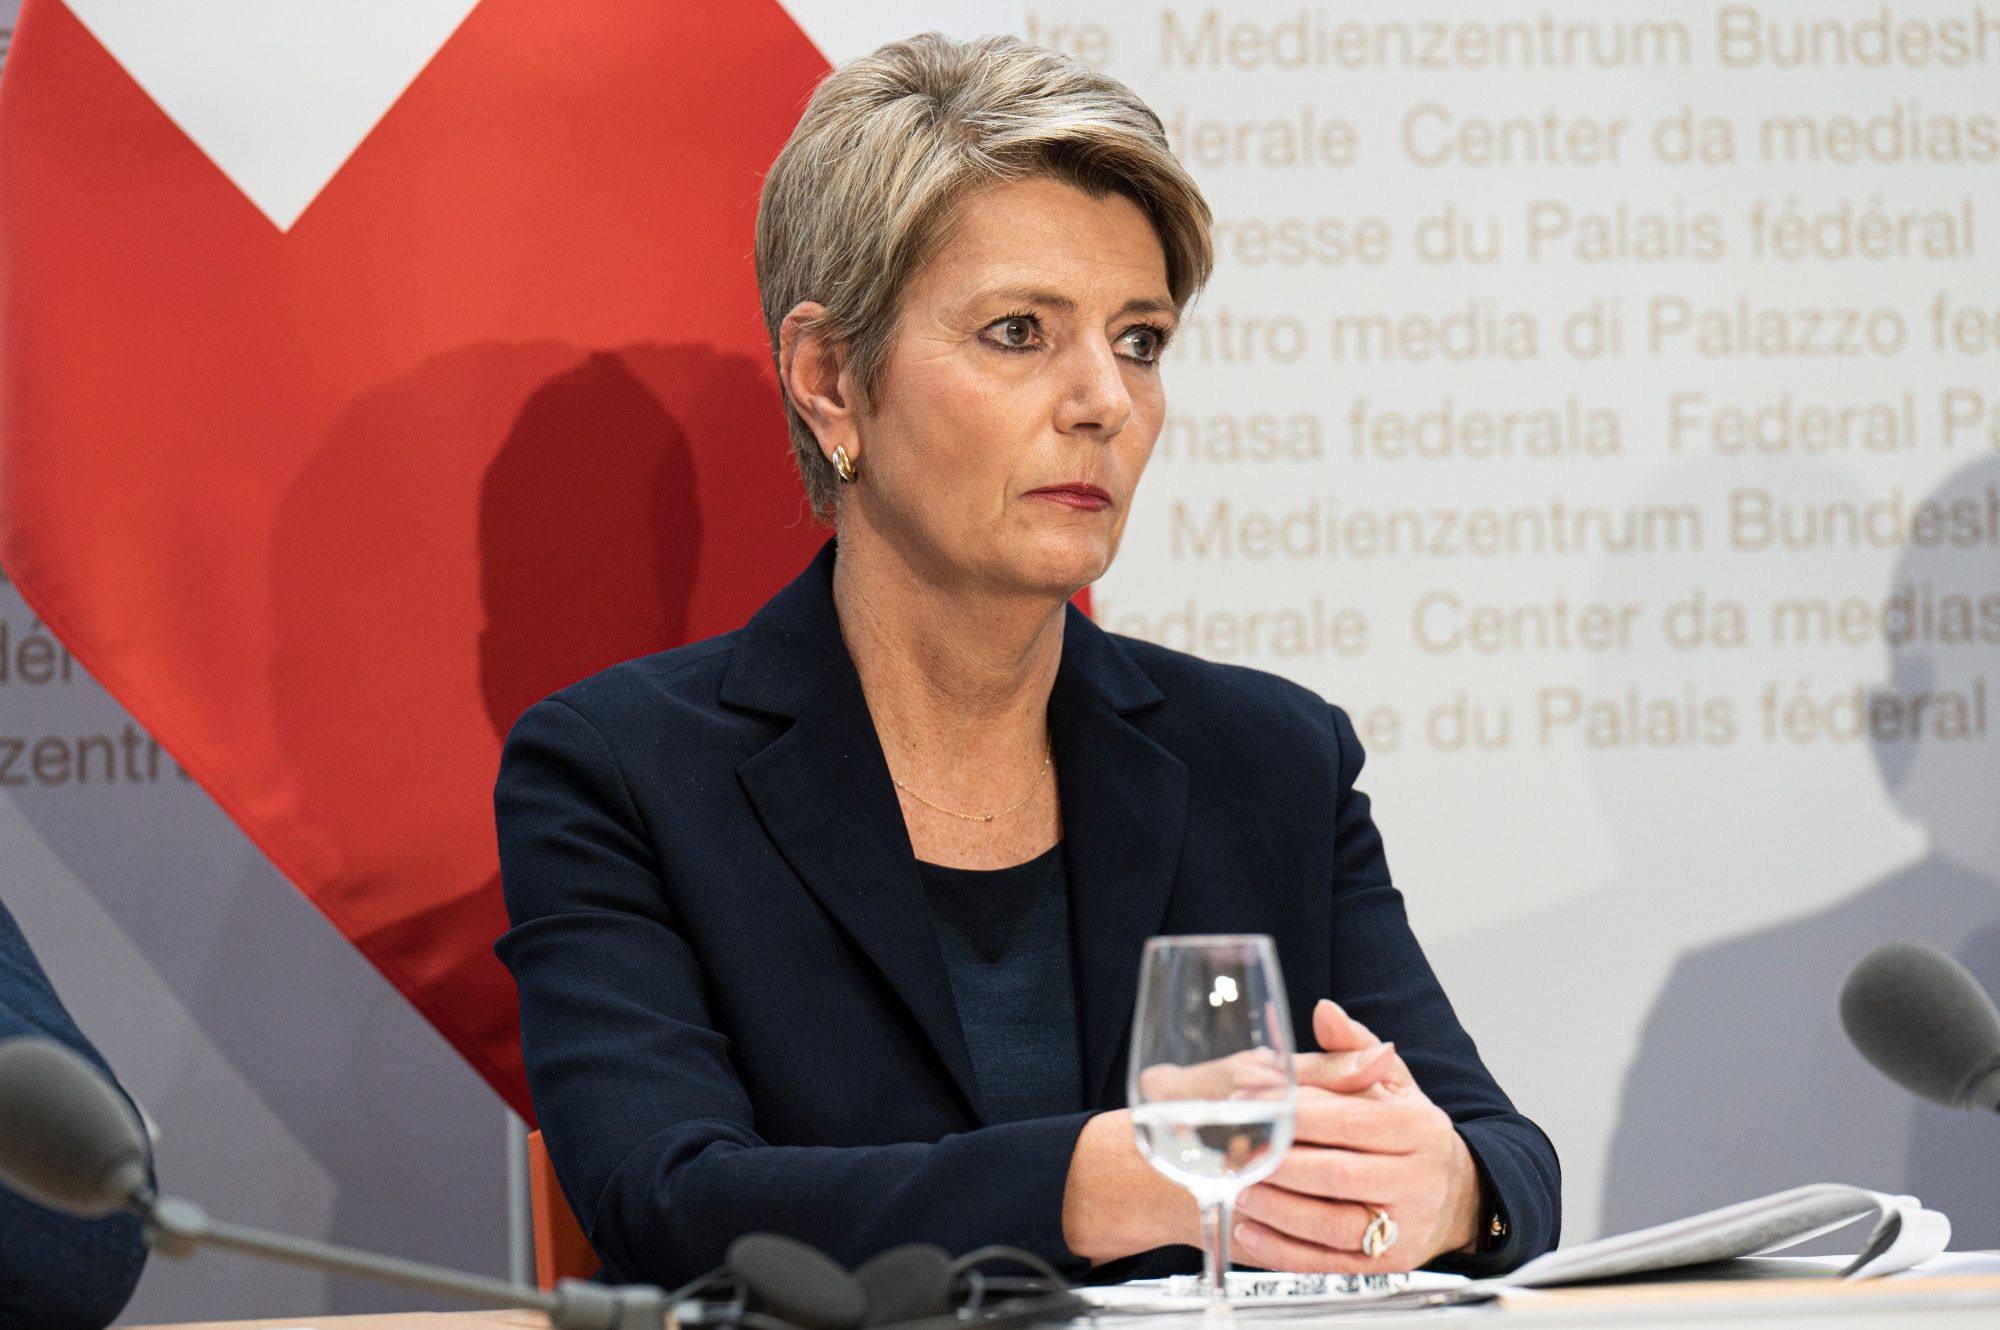 Karin Keller-Sutter, Switzerland’s finance minister said the government was forced to step in to help Credit Suisse, because the troubled bank “would not have lasted another day”. Photo: Bloomberg